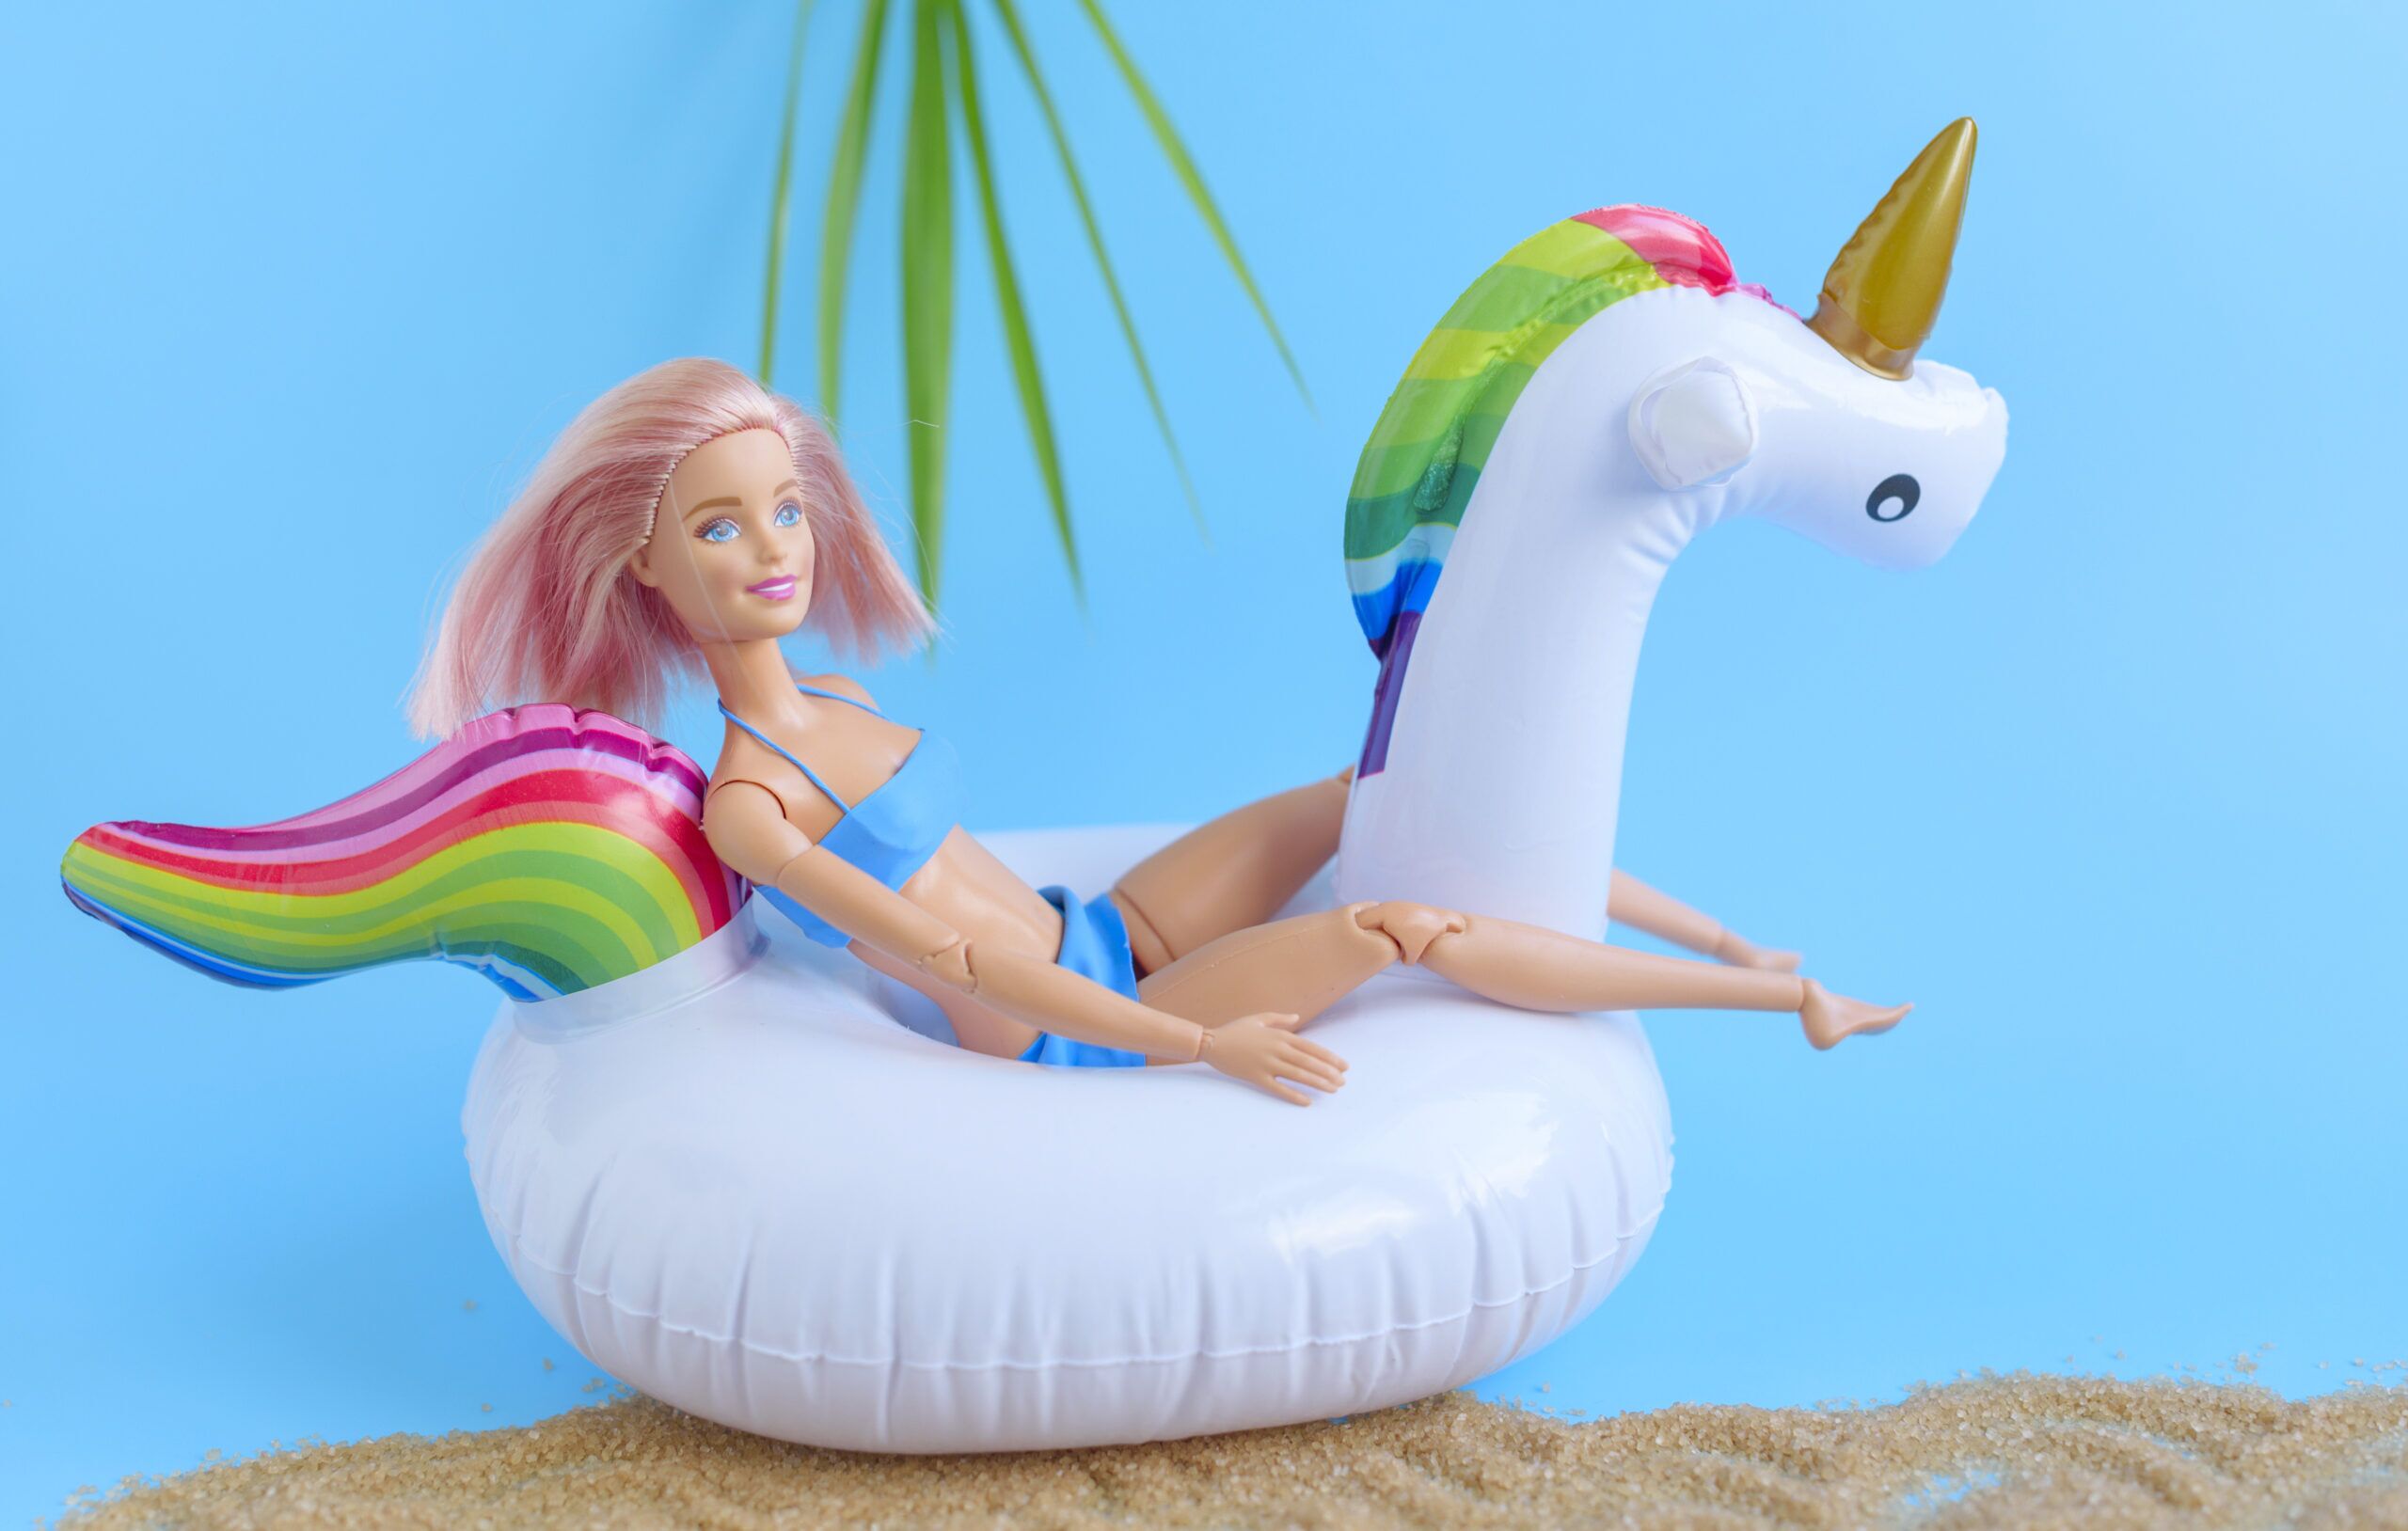 Barbie Mania Unleashed: Marketing Moves Taking the World by Storm